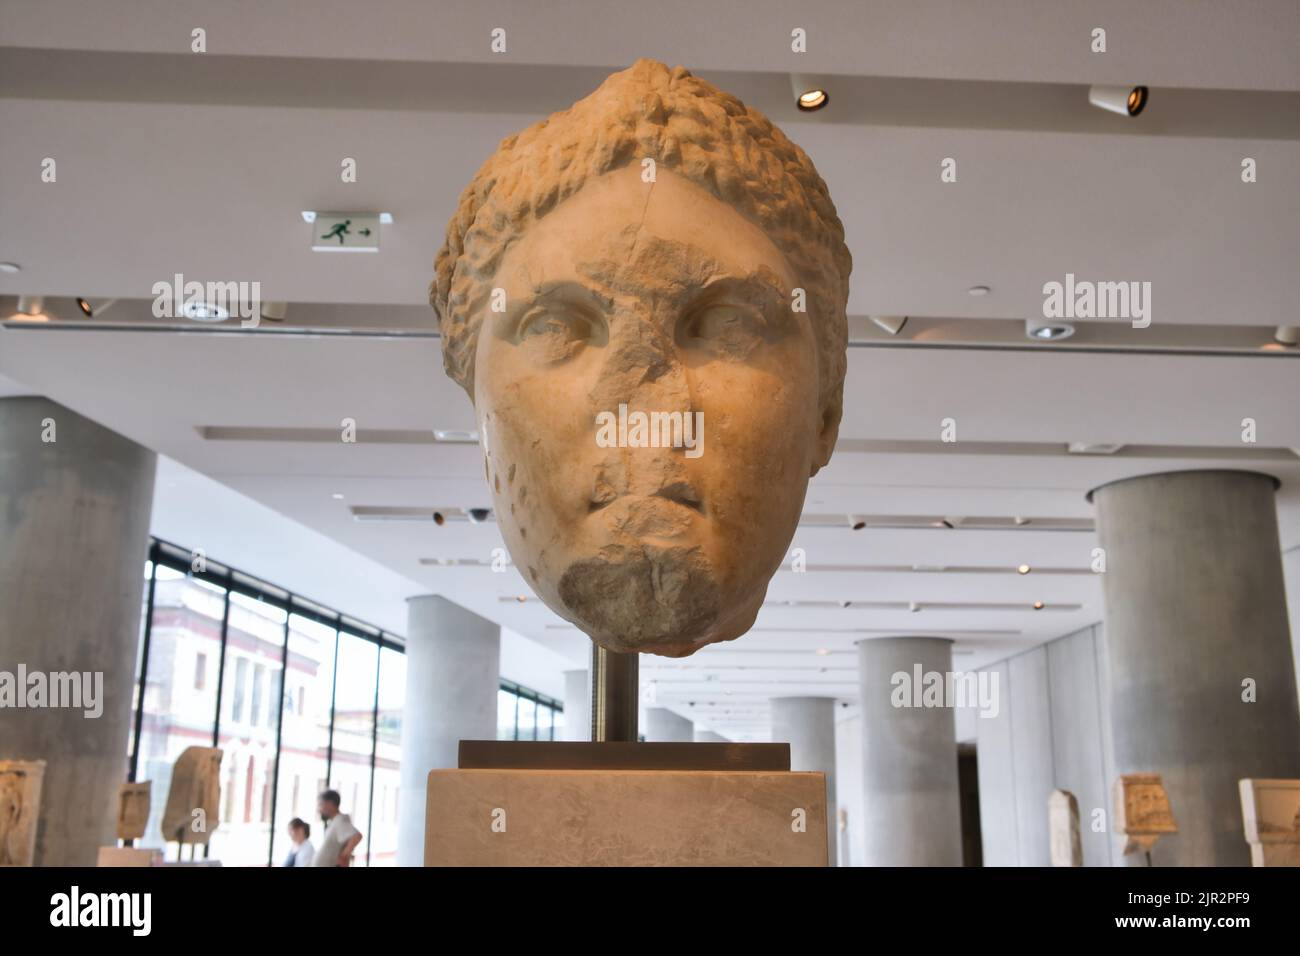 Big head of a statue of Artemis Brauronia inside the Acropolis museum in Athens Stock Photo